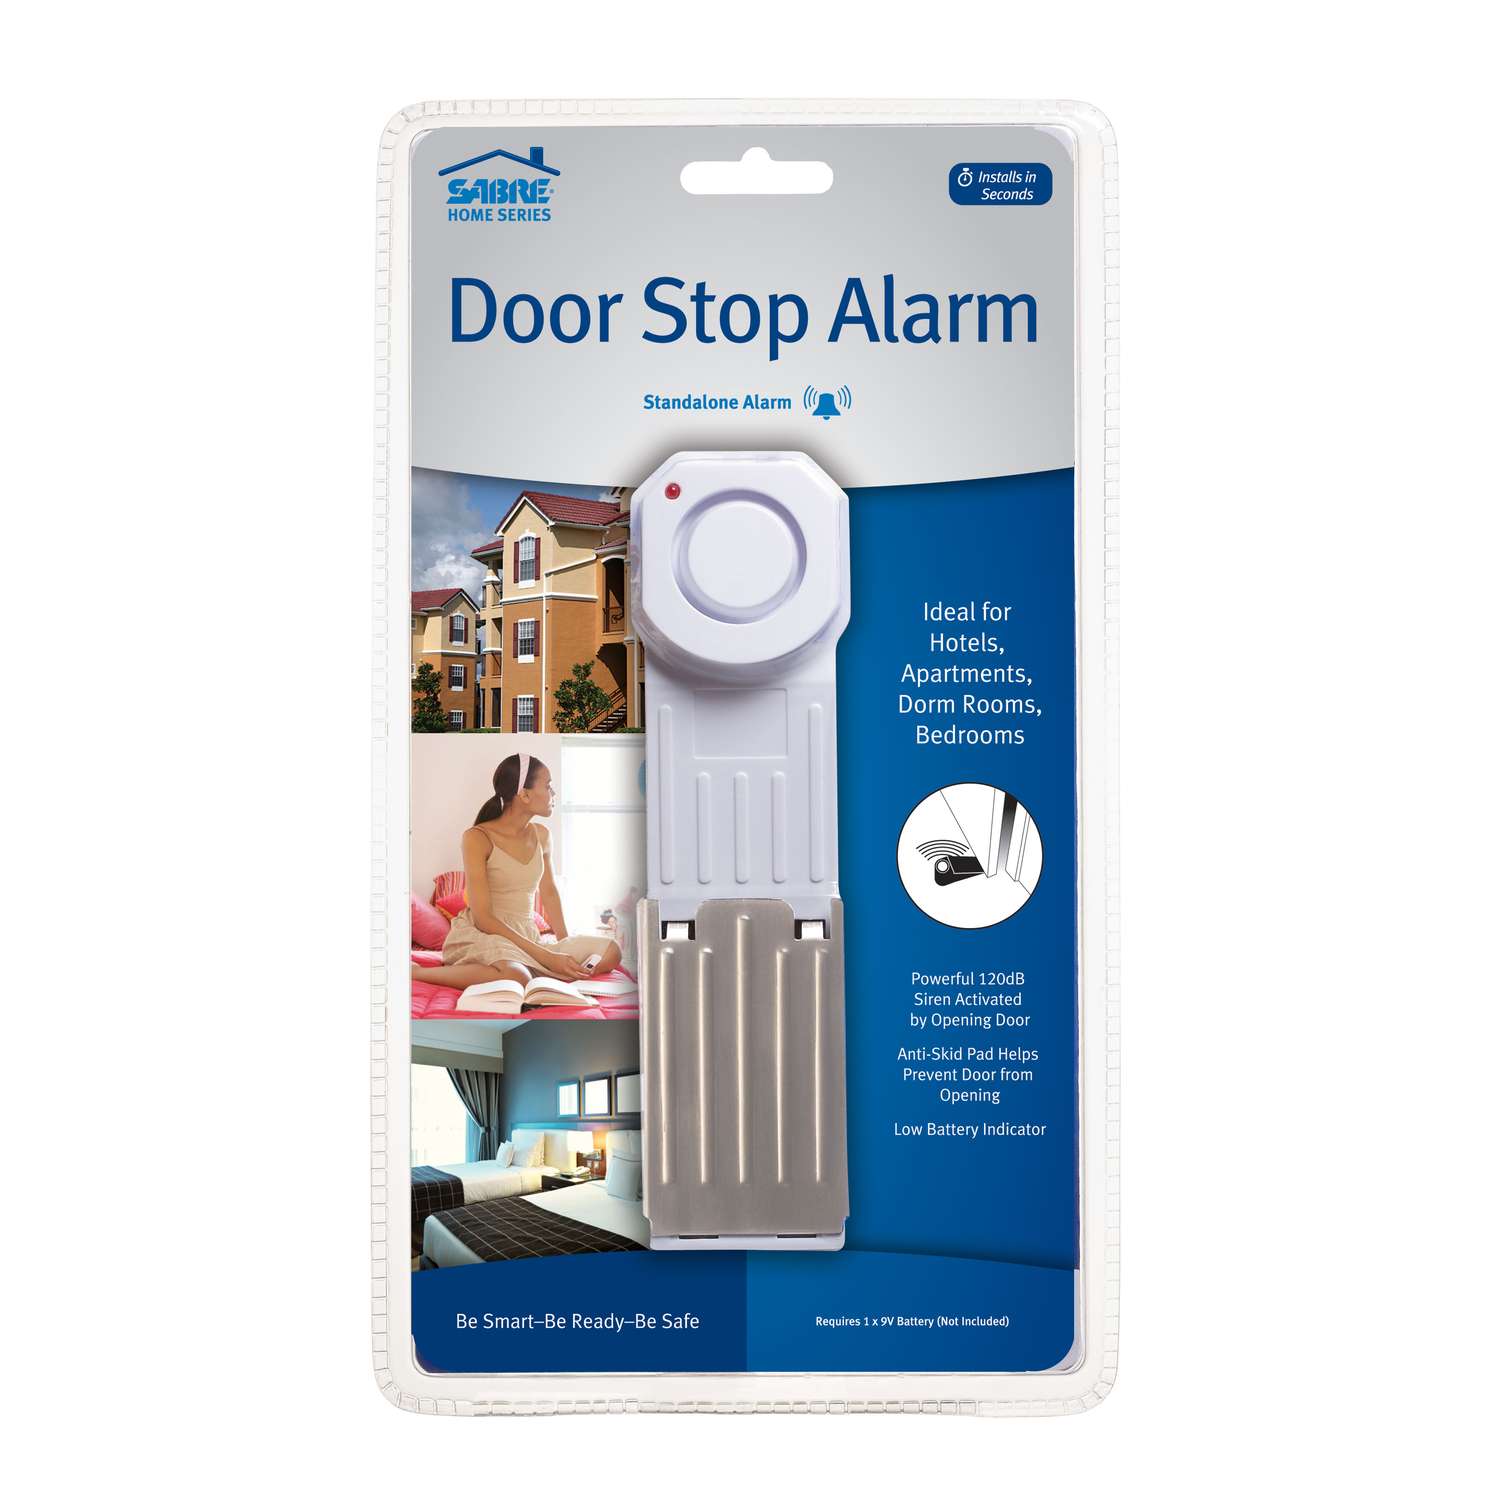 Stainless Steel Sturdy ABS Plastic Material Burglar Alert Alarm POCREATION Door Stop Security Alarm Hotels for Home Office Apartments 